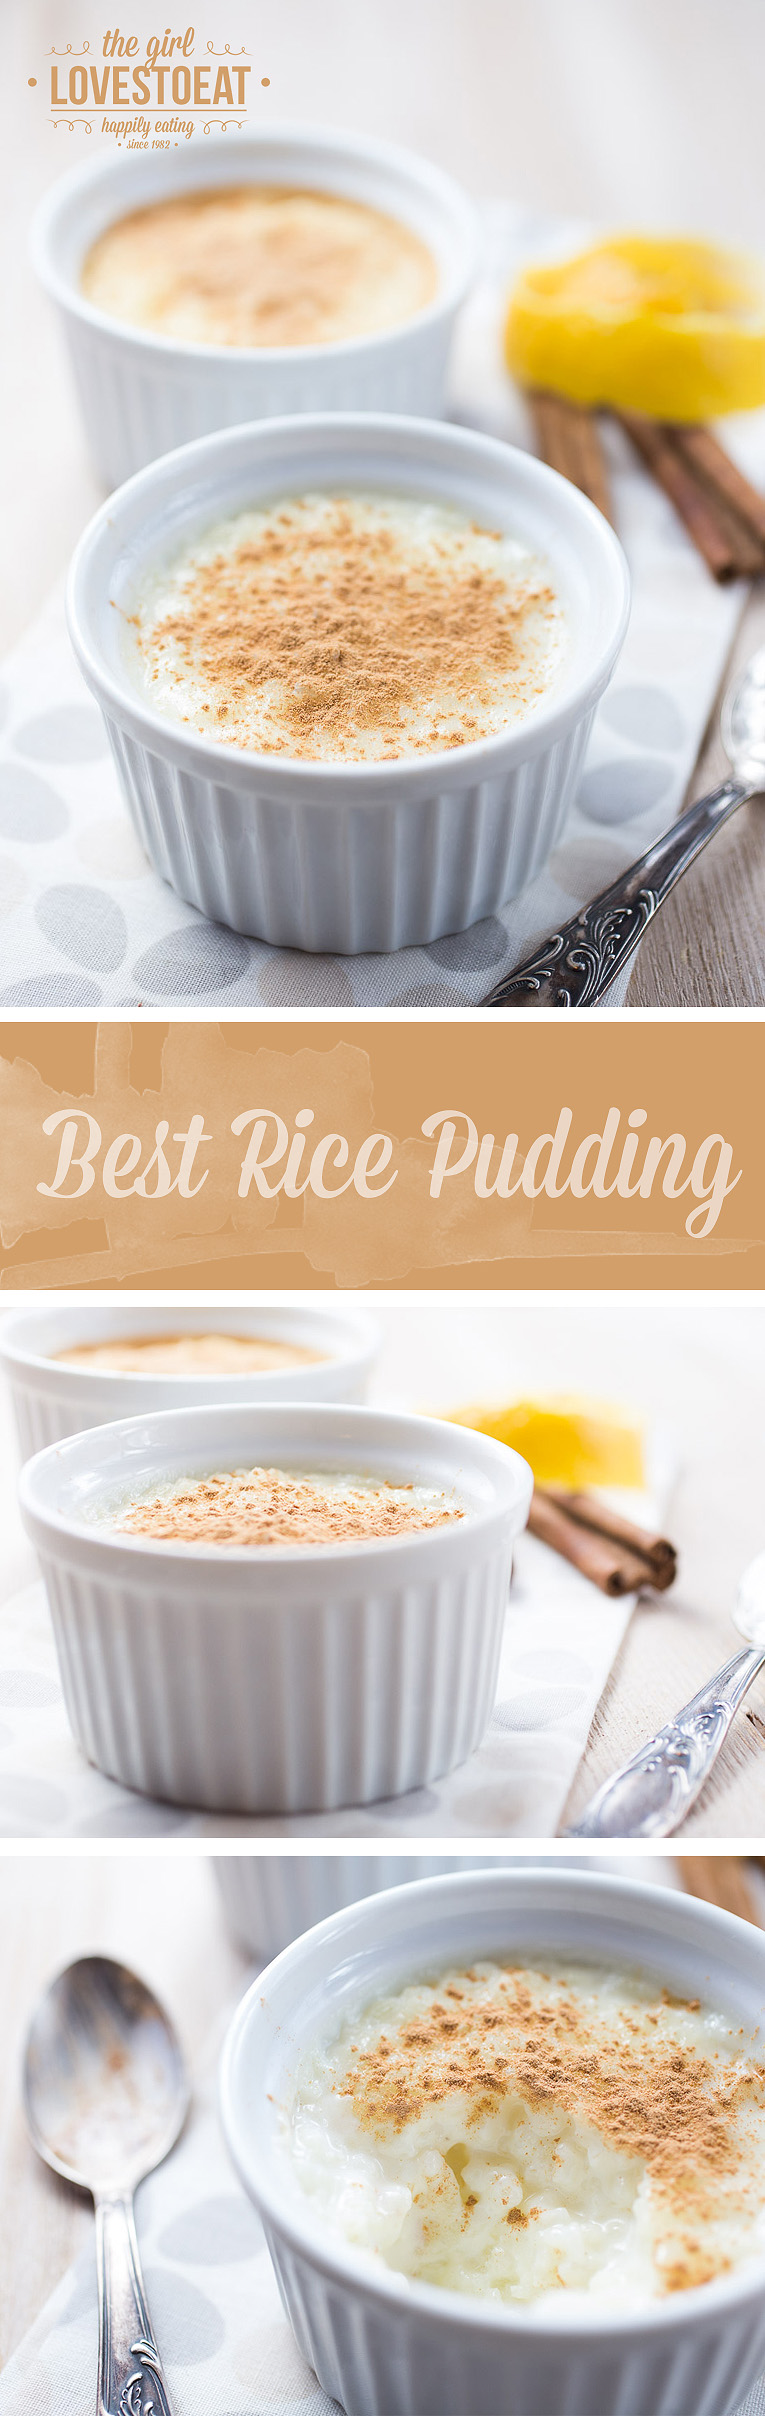 Best Rice Pudding Ever!